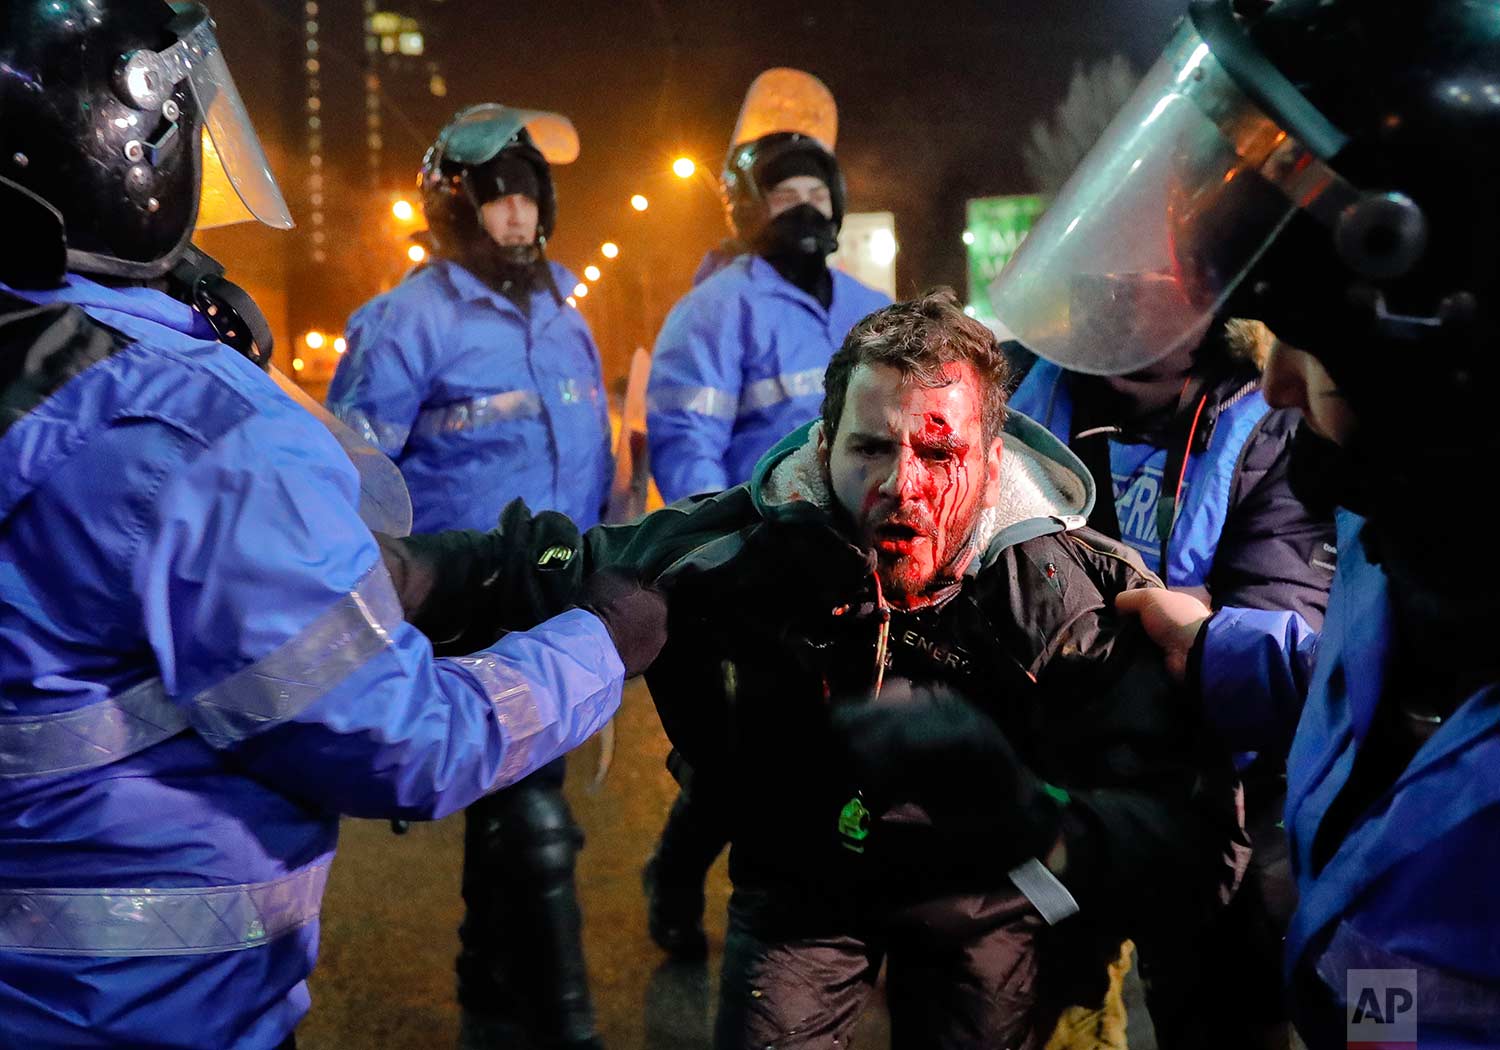  In this Thursday, Feb. 2, 2017 photo, Romanian riot police detain a man, face covered in blood, after minor clashes erupted during a protest in Bucharest, Romania. Brief clashes broke out between protesters and police in Romania's capital, as tens o